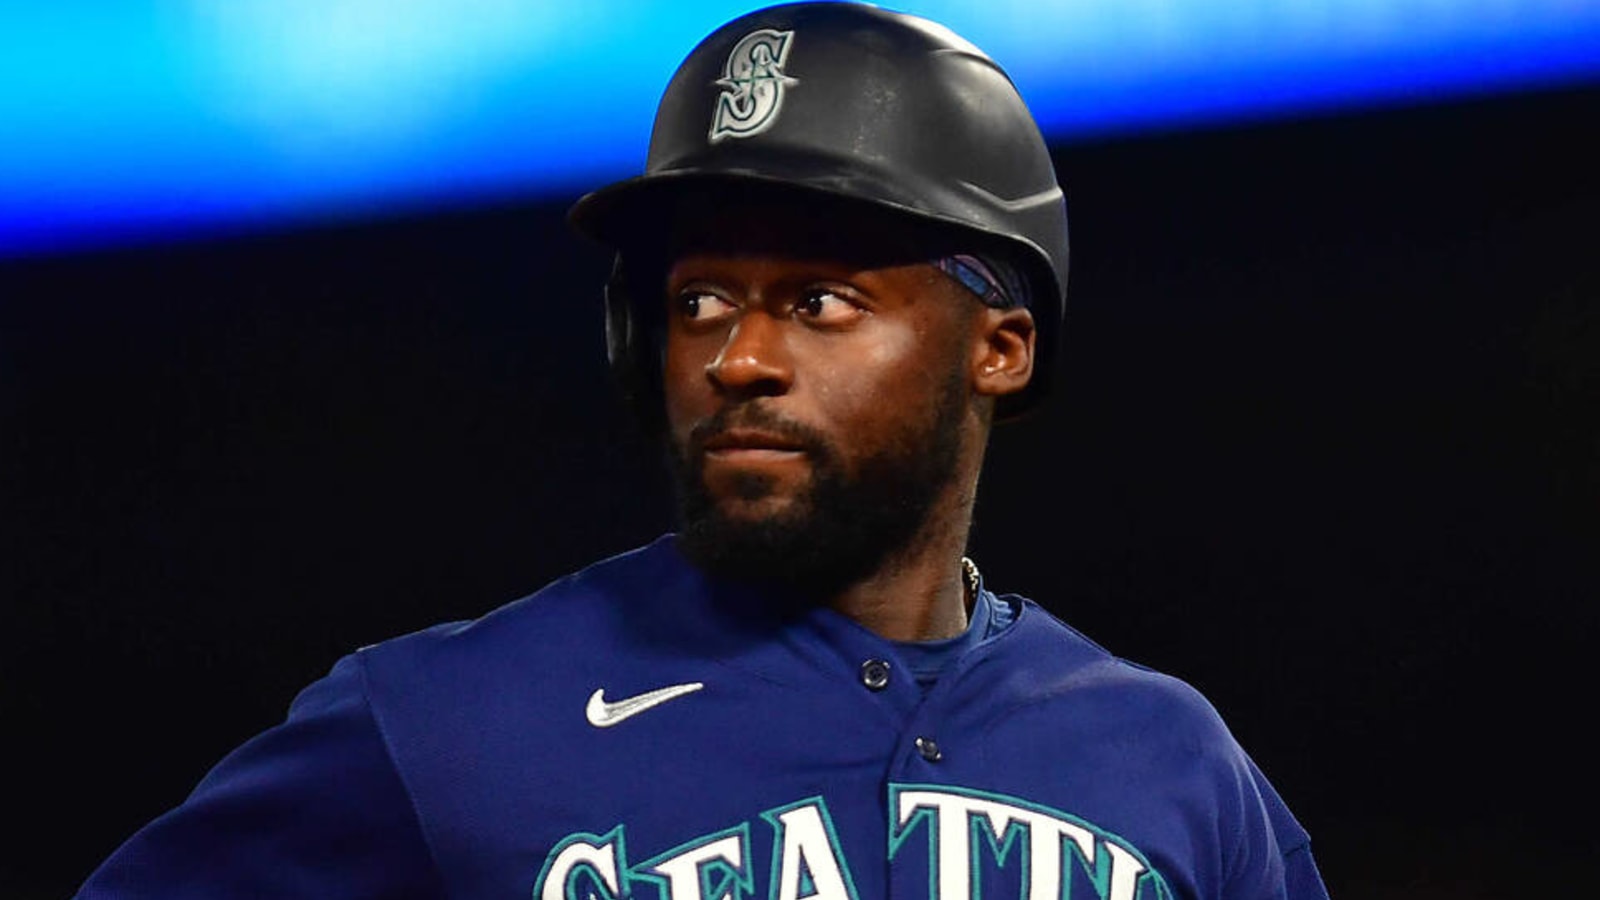 Taylor Trammell to miss seven-plus weeks due to hamate surgery